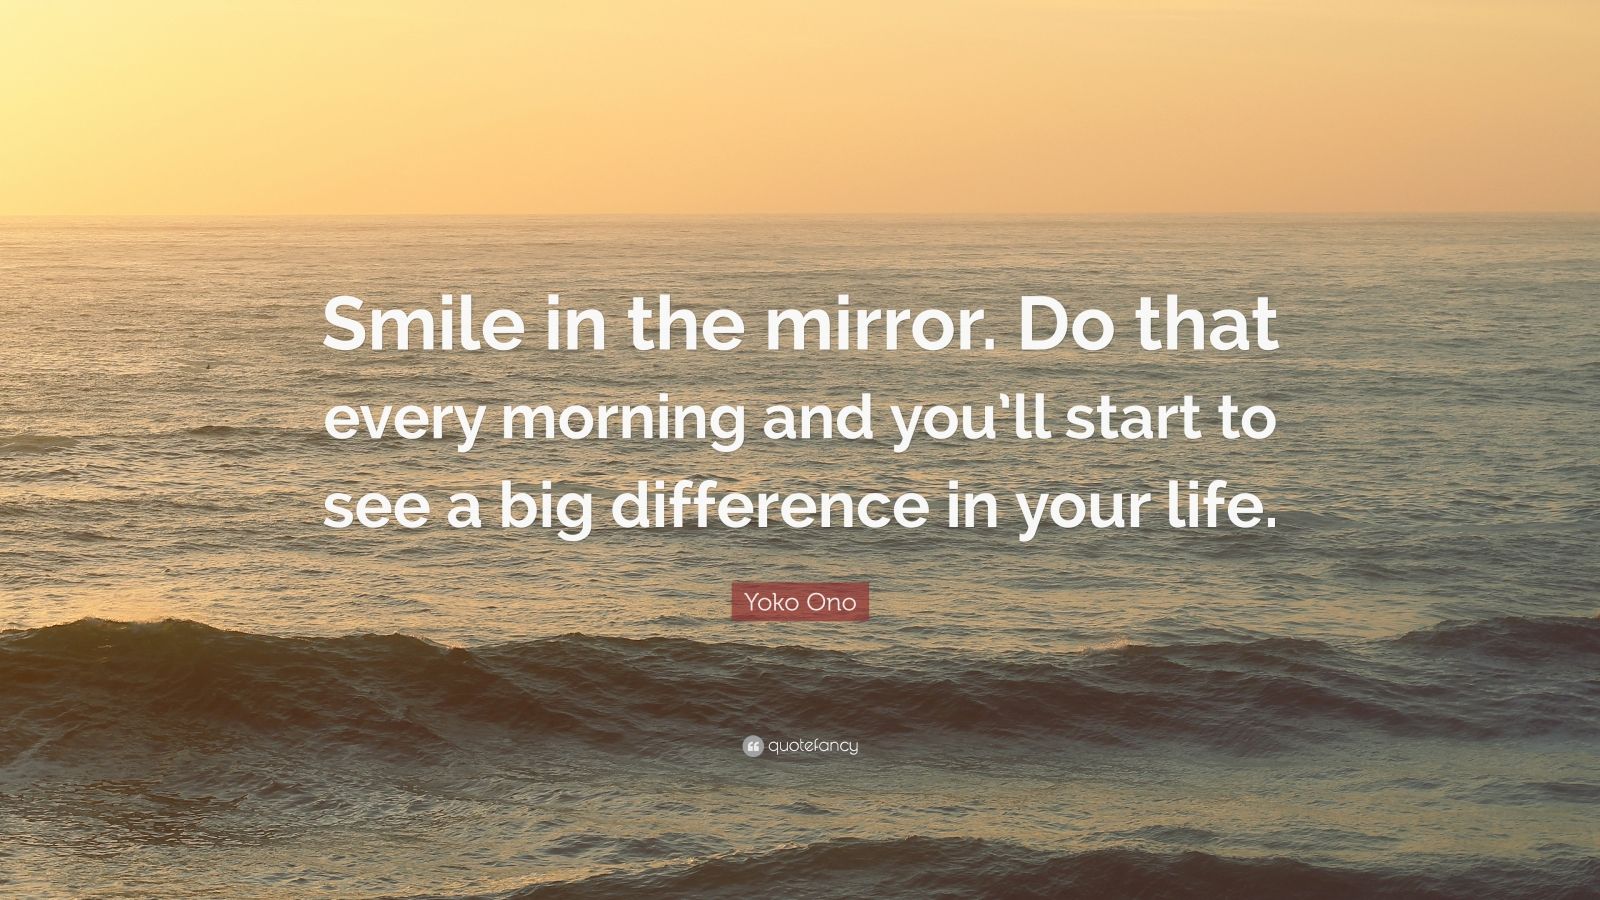 Yoko Ono Quote: “Smile in the mirror. Do that every morning and you’ll ...